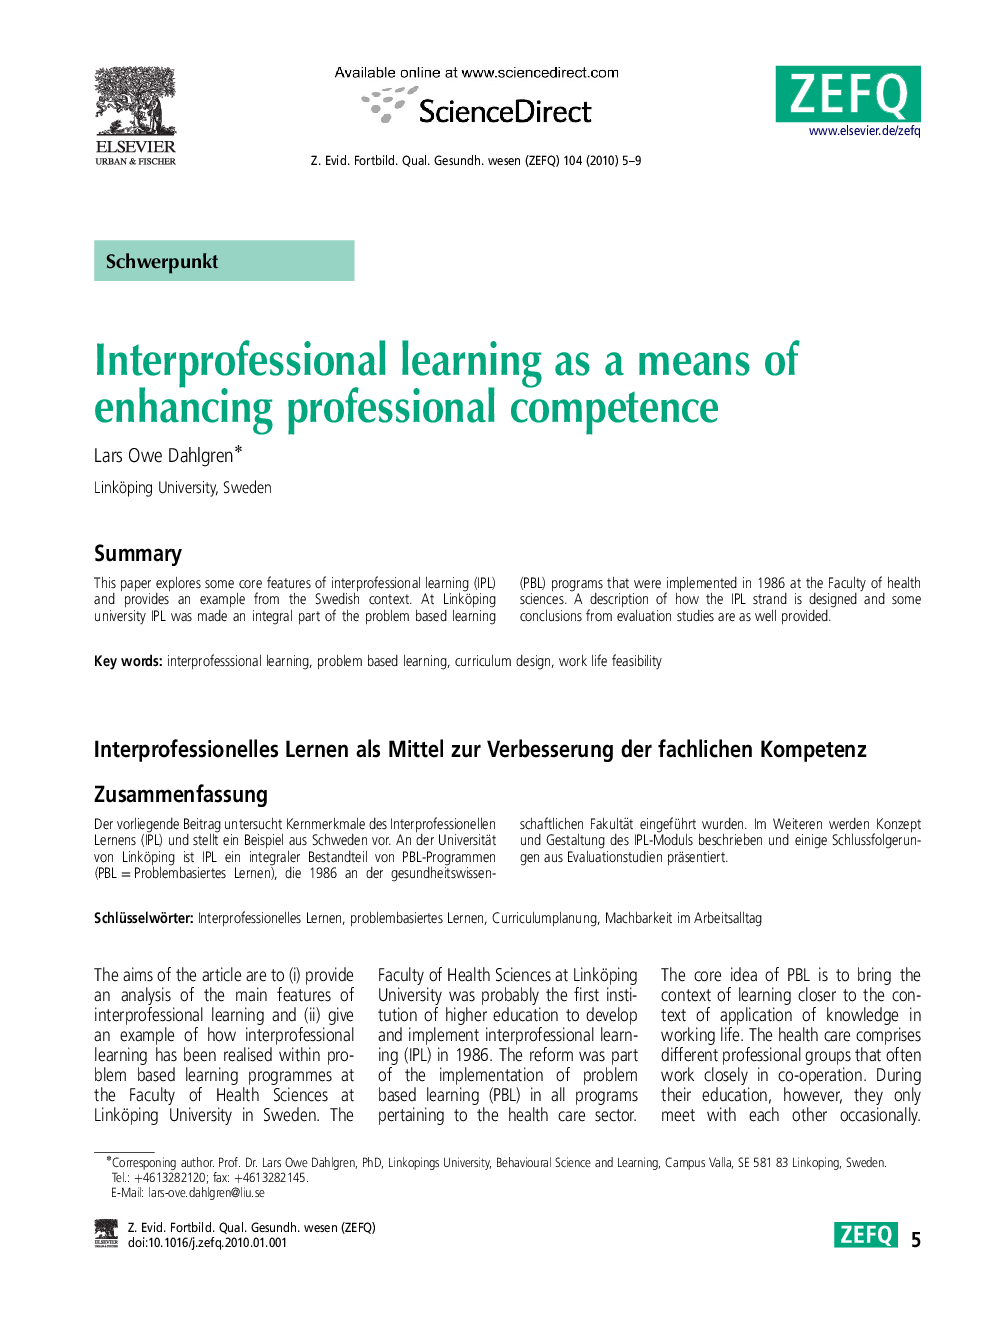 Interprofessional learning as a means of enhancing professional competence